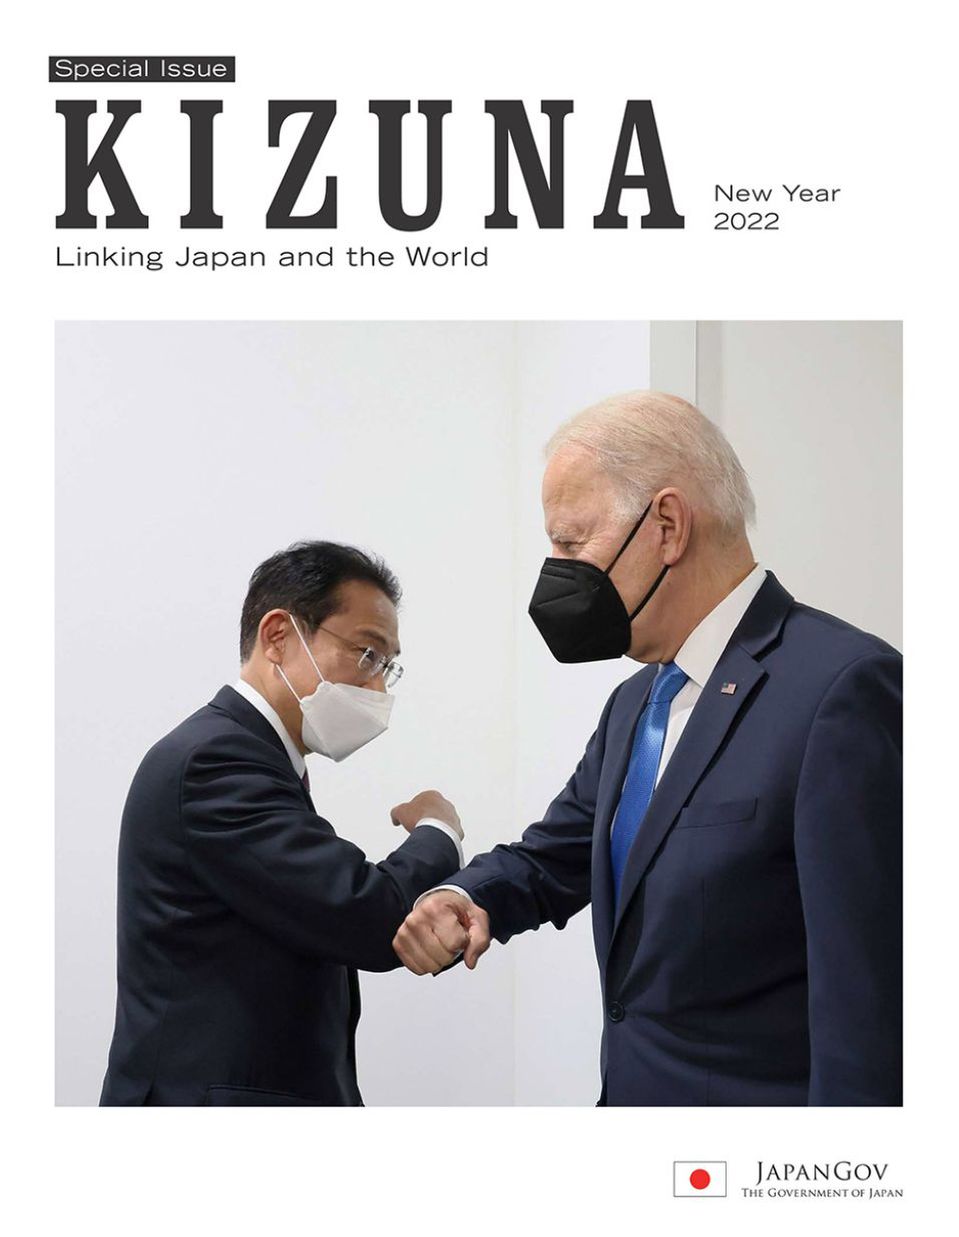  KIZUNA New Year 2022 Special Issue